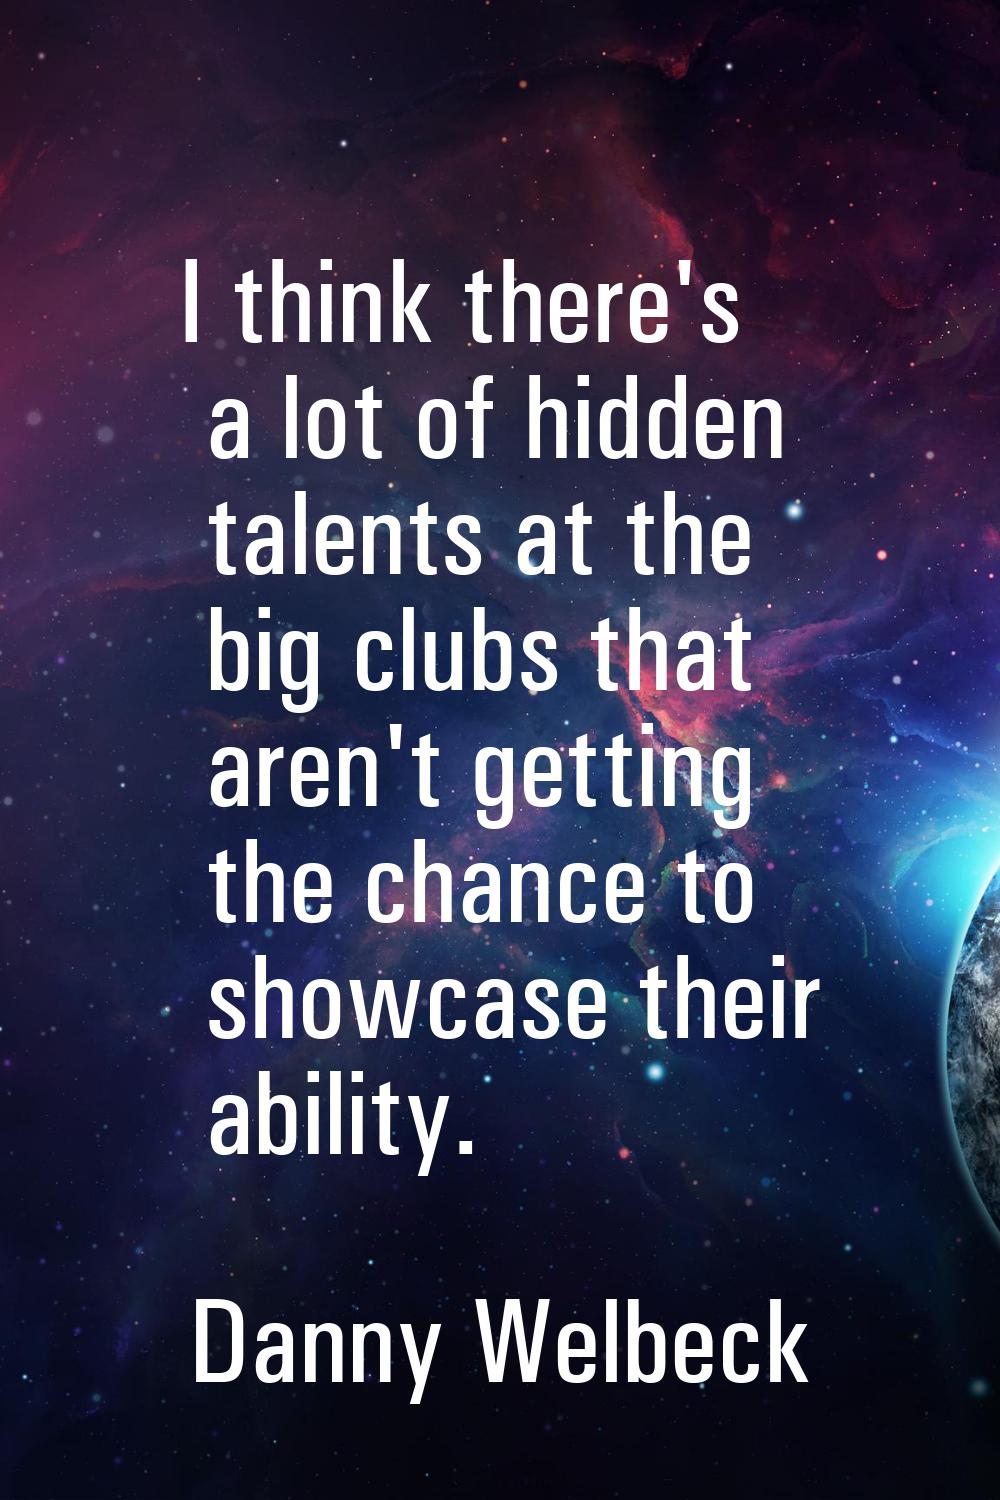 I think there's a lot of hidden talents at the big clubs that aren't getting the chance to showcase